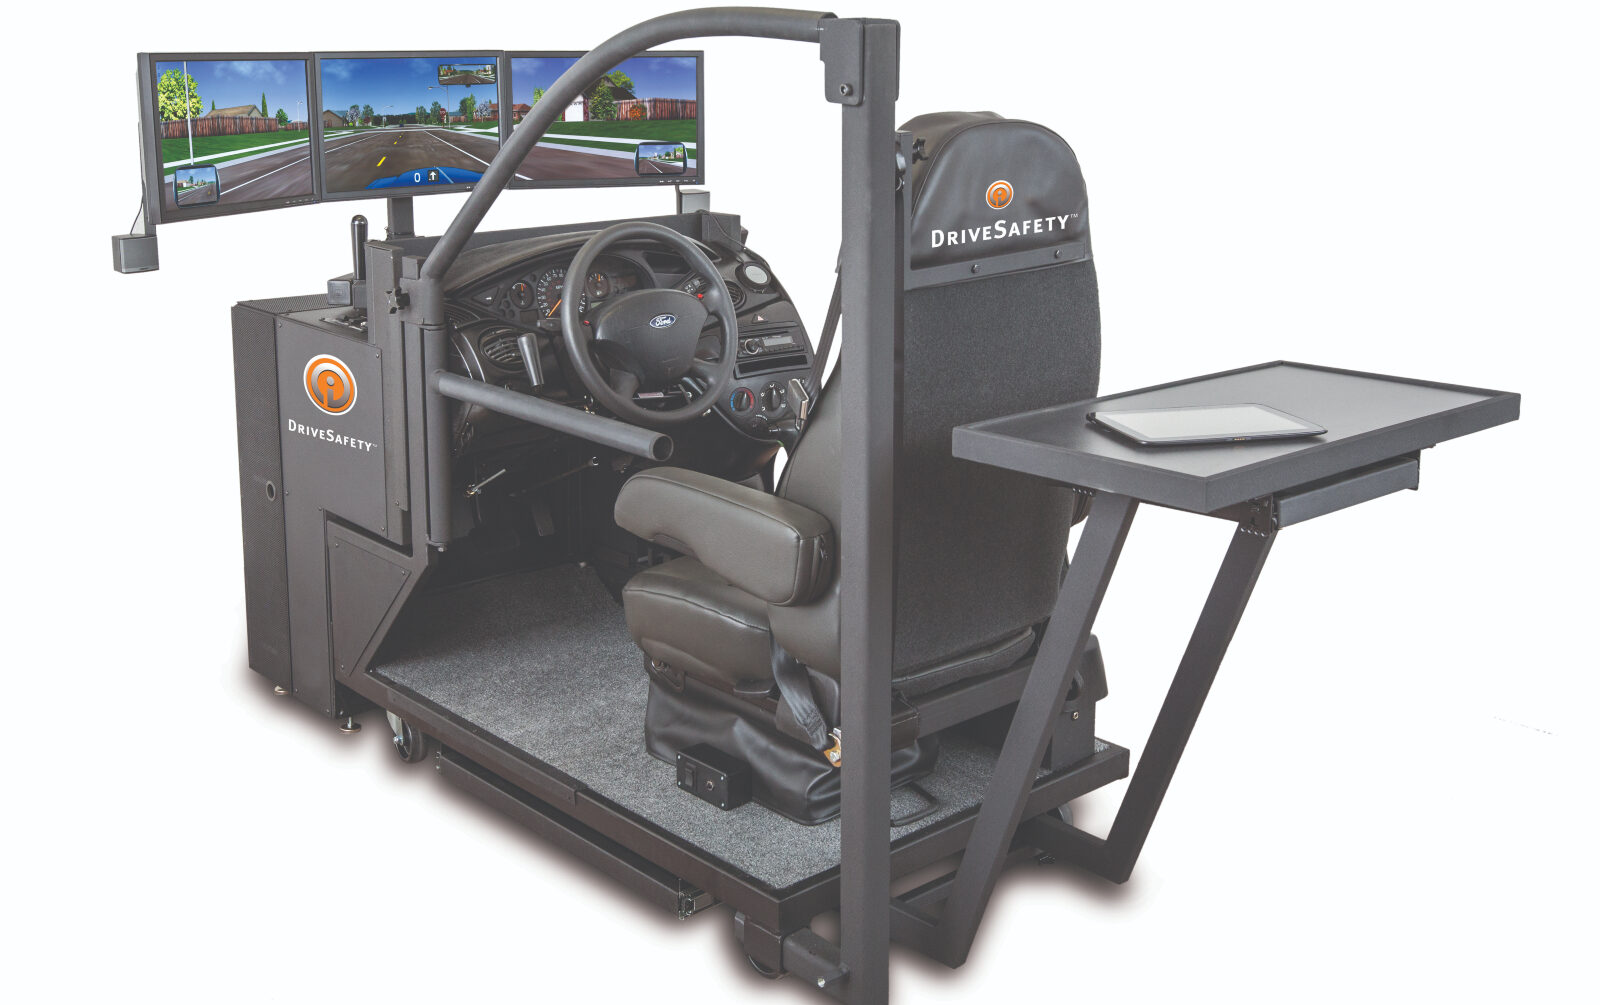 DriveSafety CDS-250 Driving Simulator: VA Mobile » DriveSafety CDS-250 Driving  Simulator » Mobility, Activity, & Participation (MAP) Lab » College of  Public Health and Health Professions » University of Florida